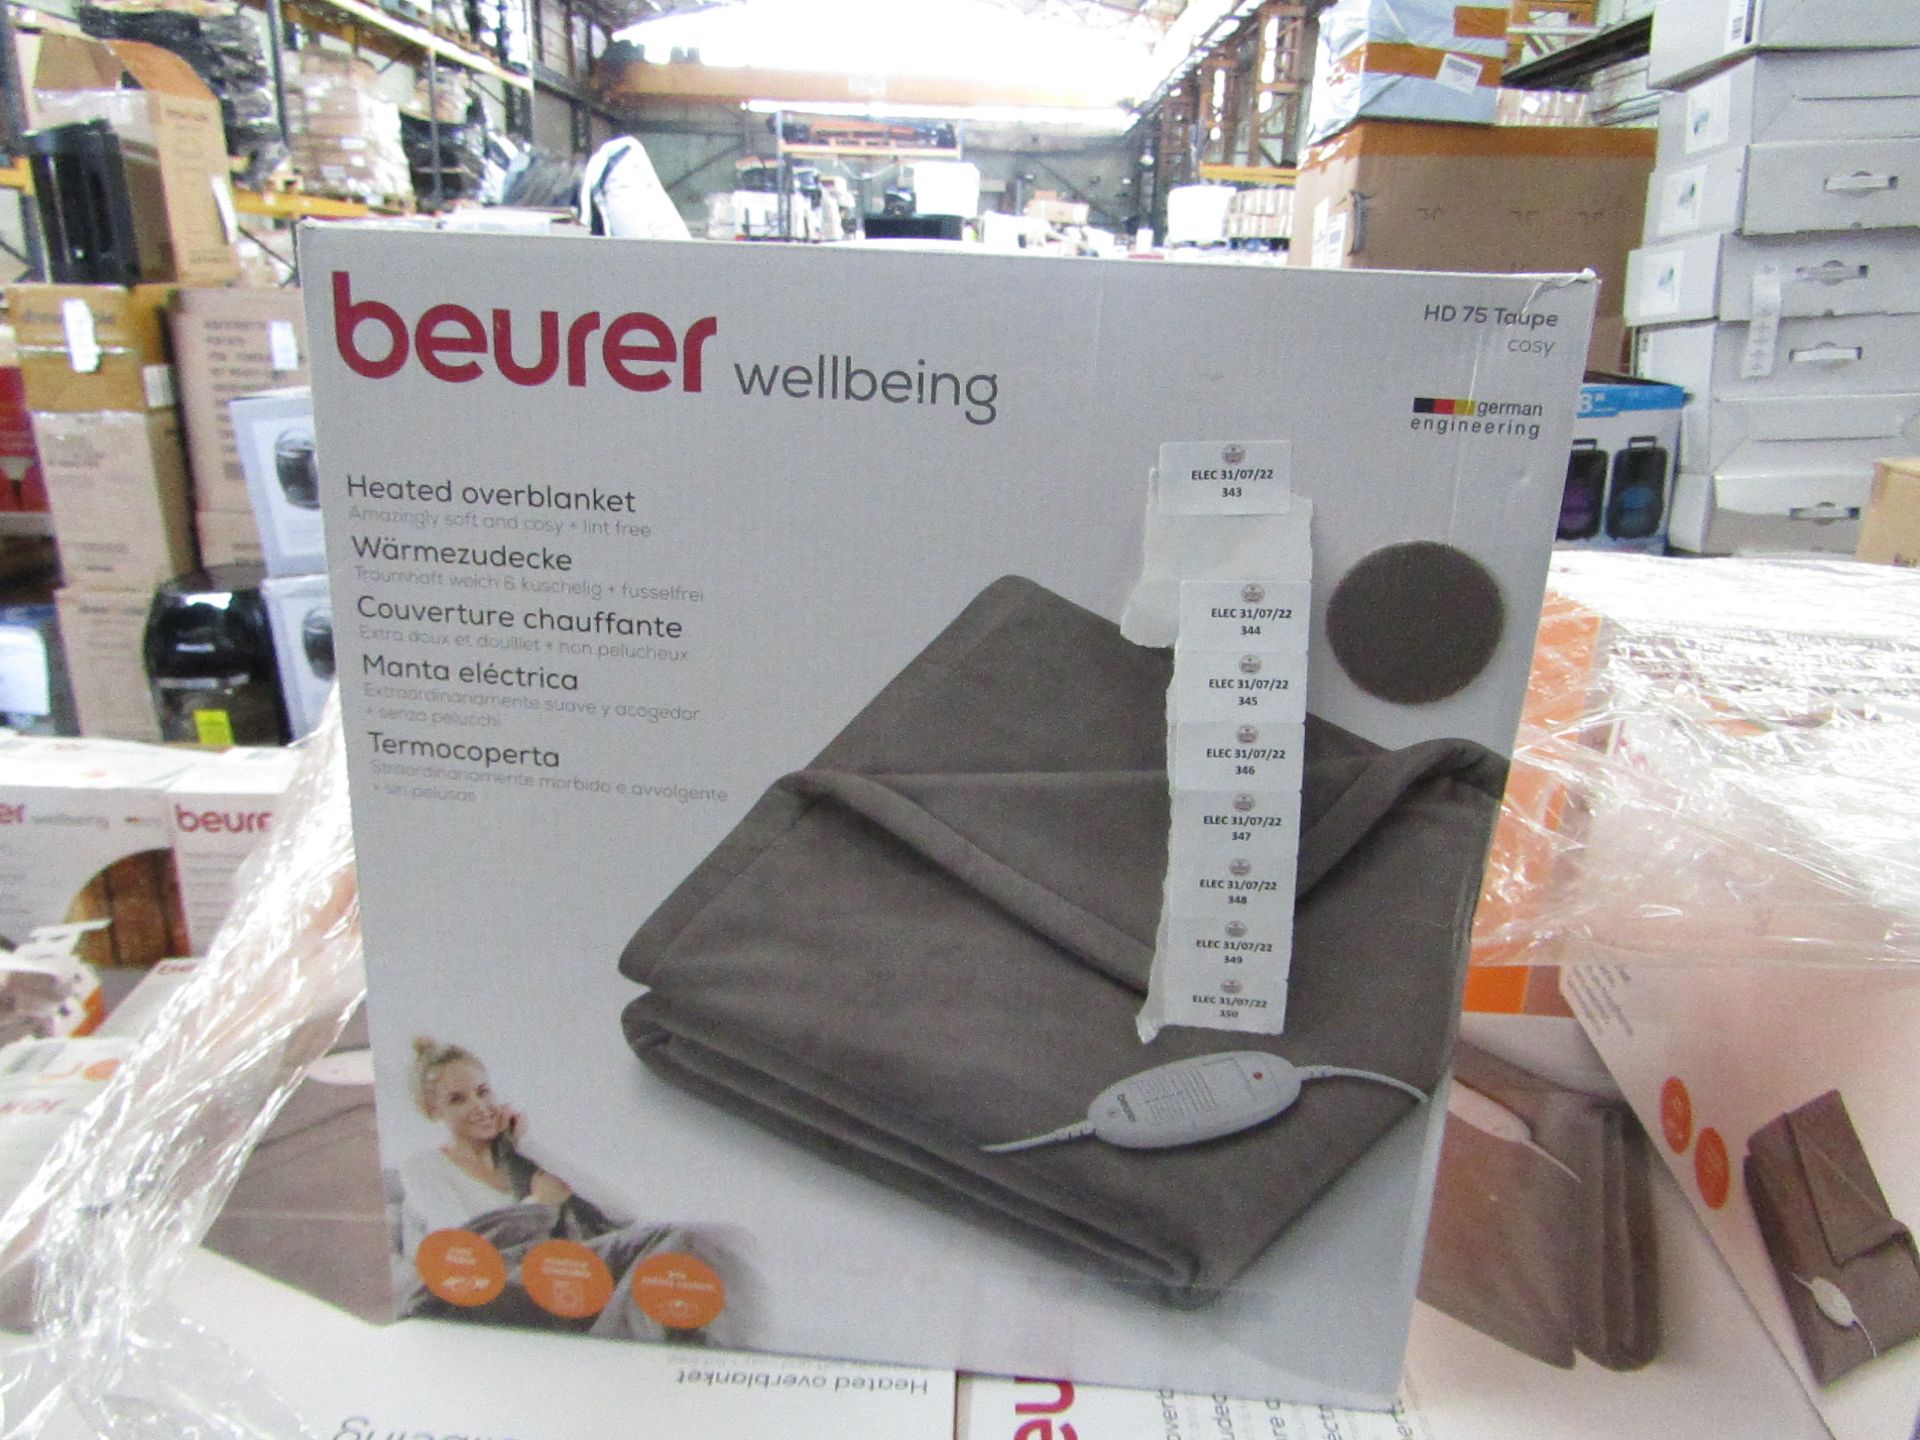 1x Beurer Heated Overblanket HD75 - This item is graded B - RRP œ60